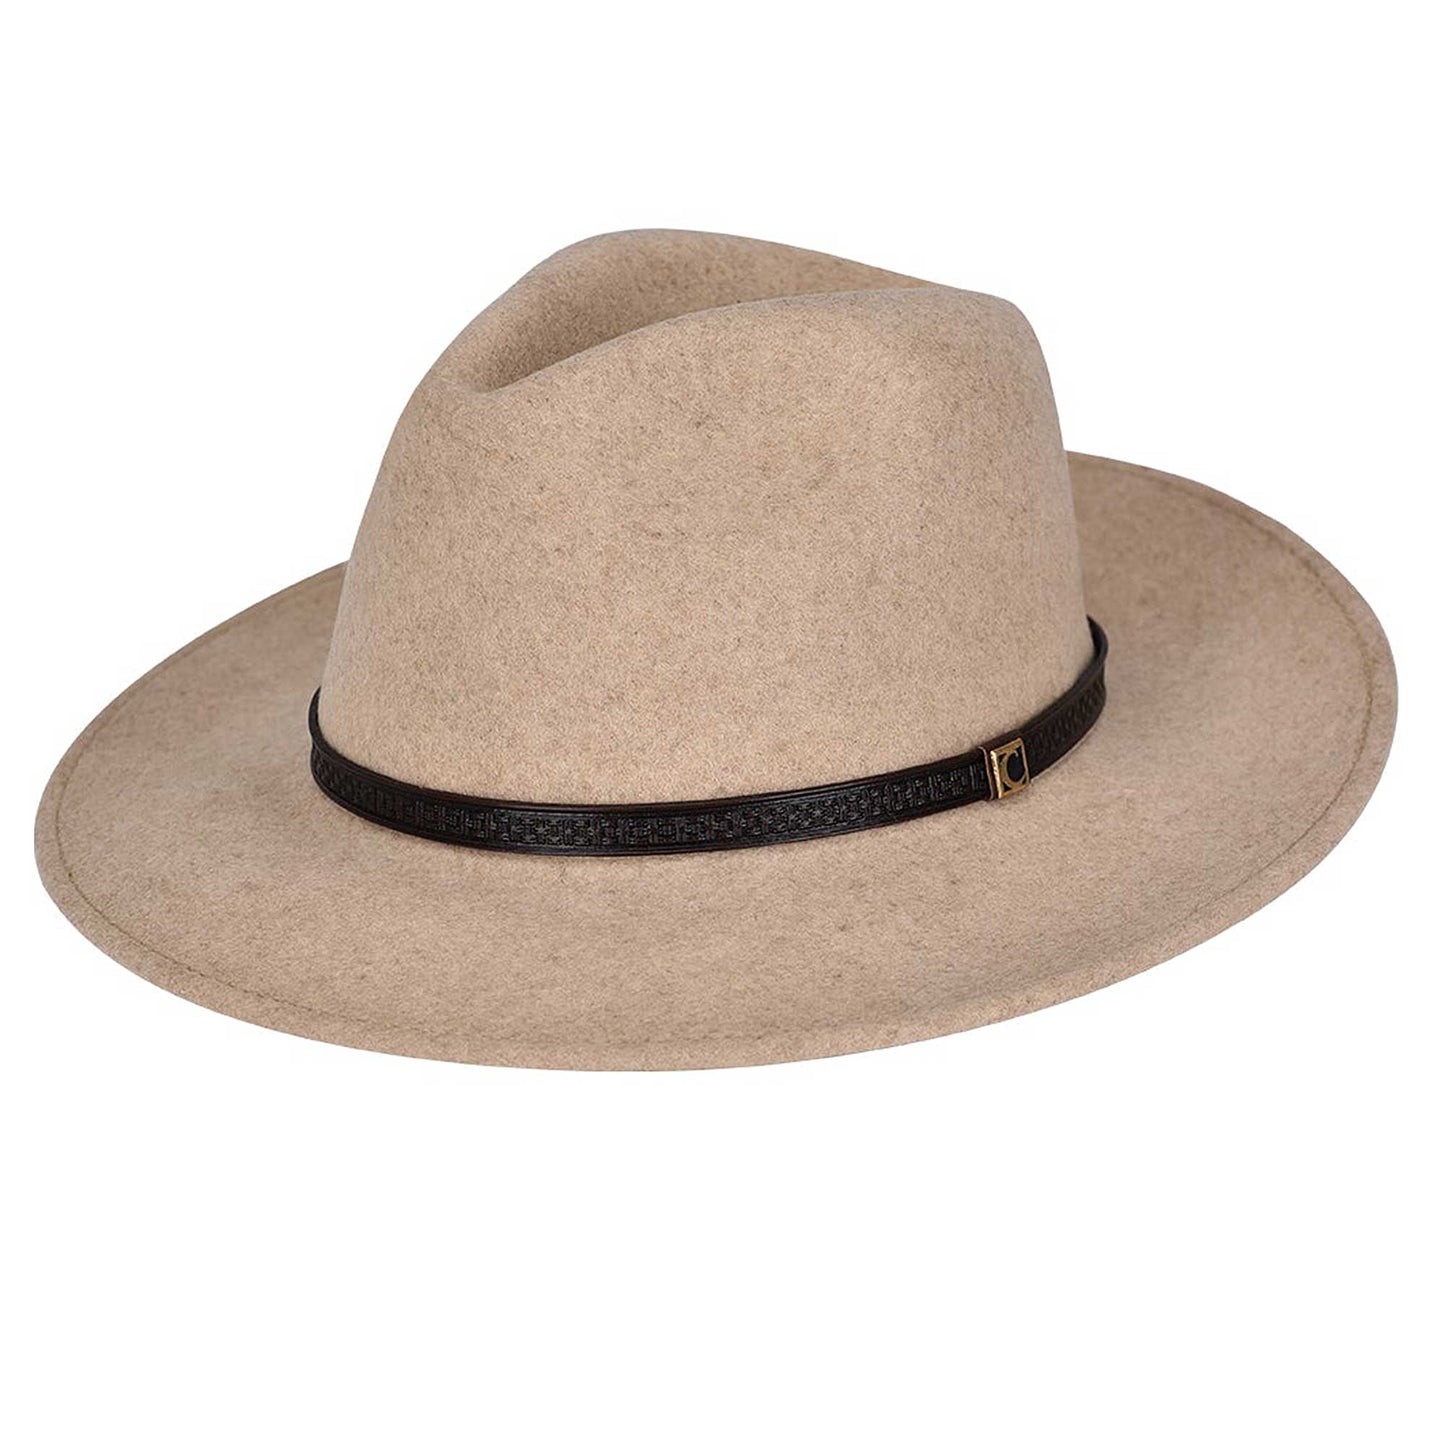 Cuadra sand color hat with leather belt